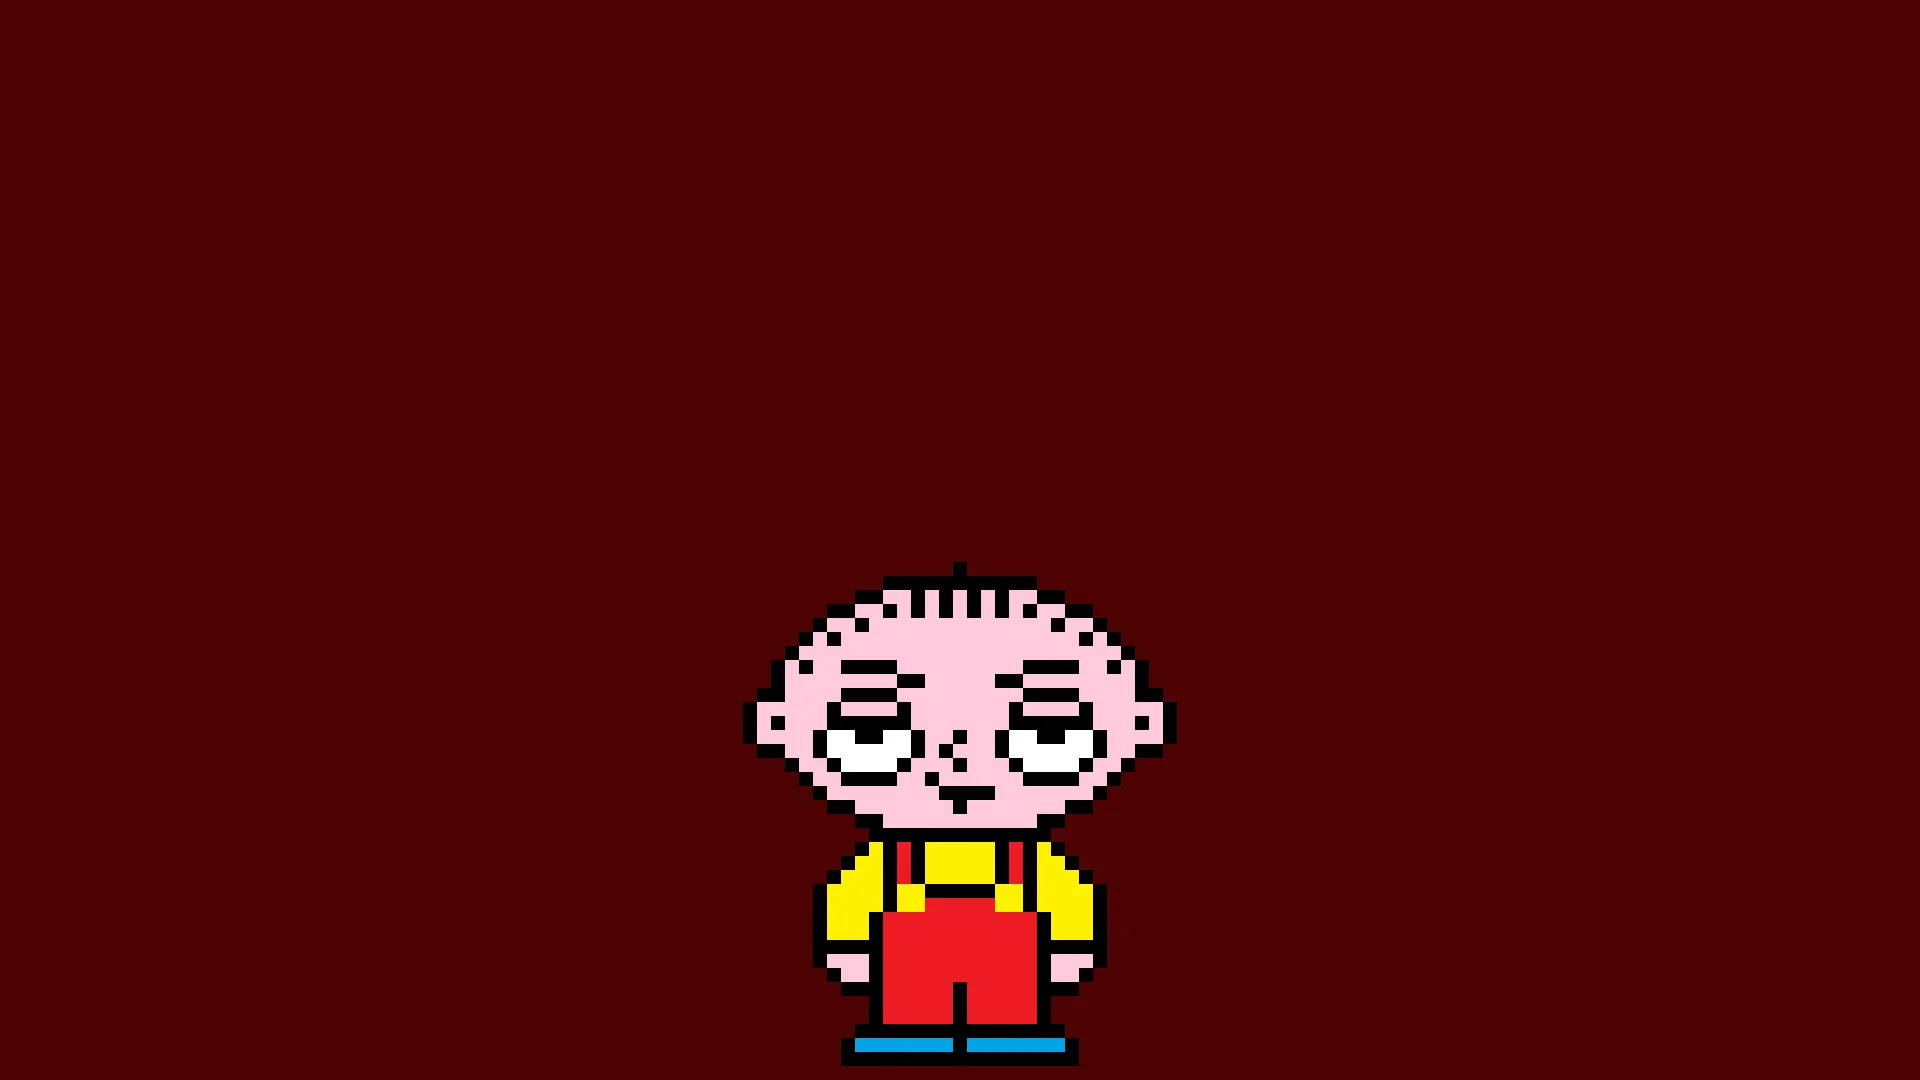 Stewie griffin pixel art pixels the family guy wallpapers hd